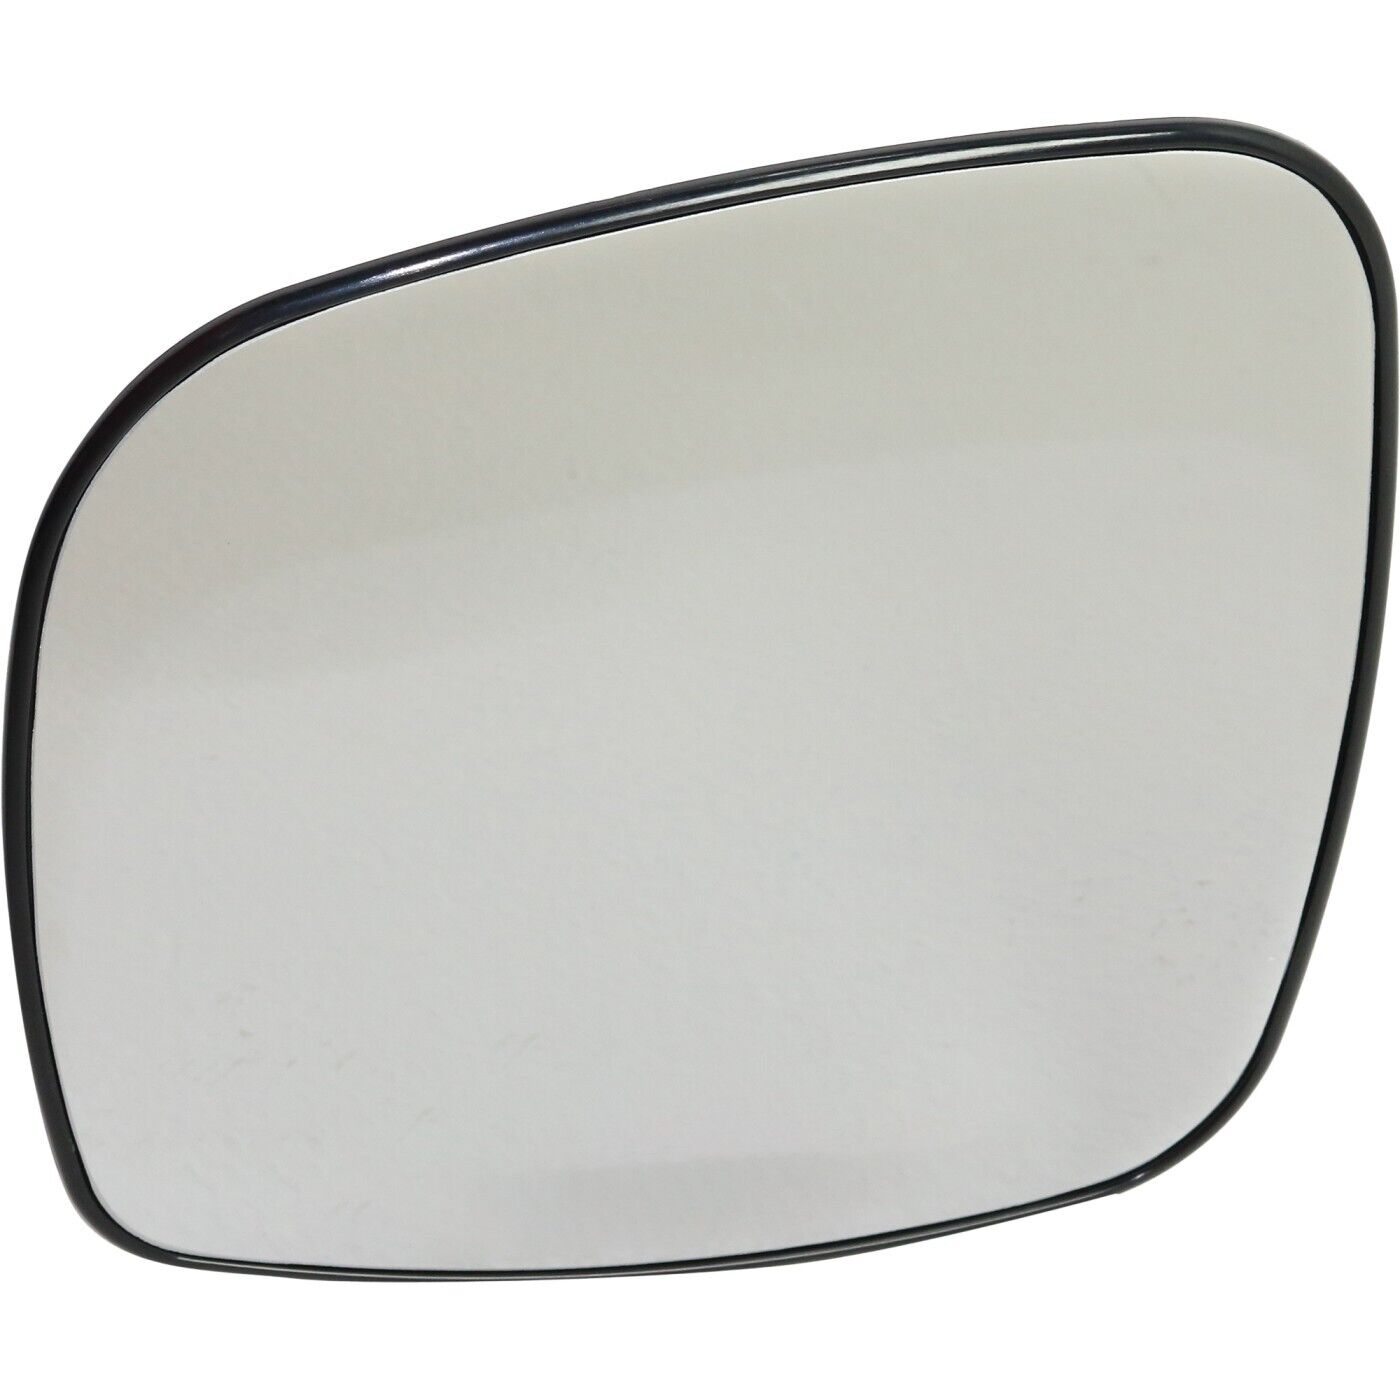 Mirror Glass For 08-16 Dodge Grand Caravan Chrysler Town & Country Left Heated